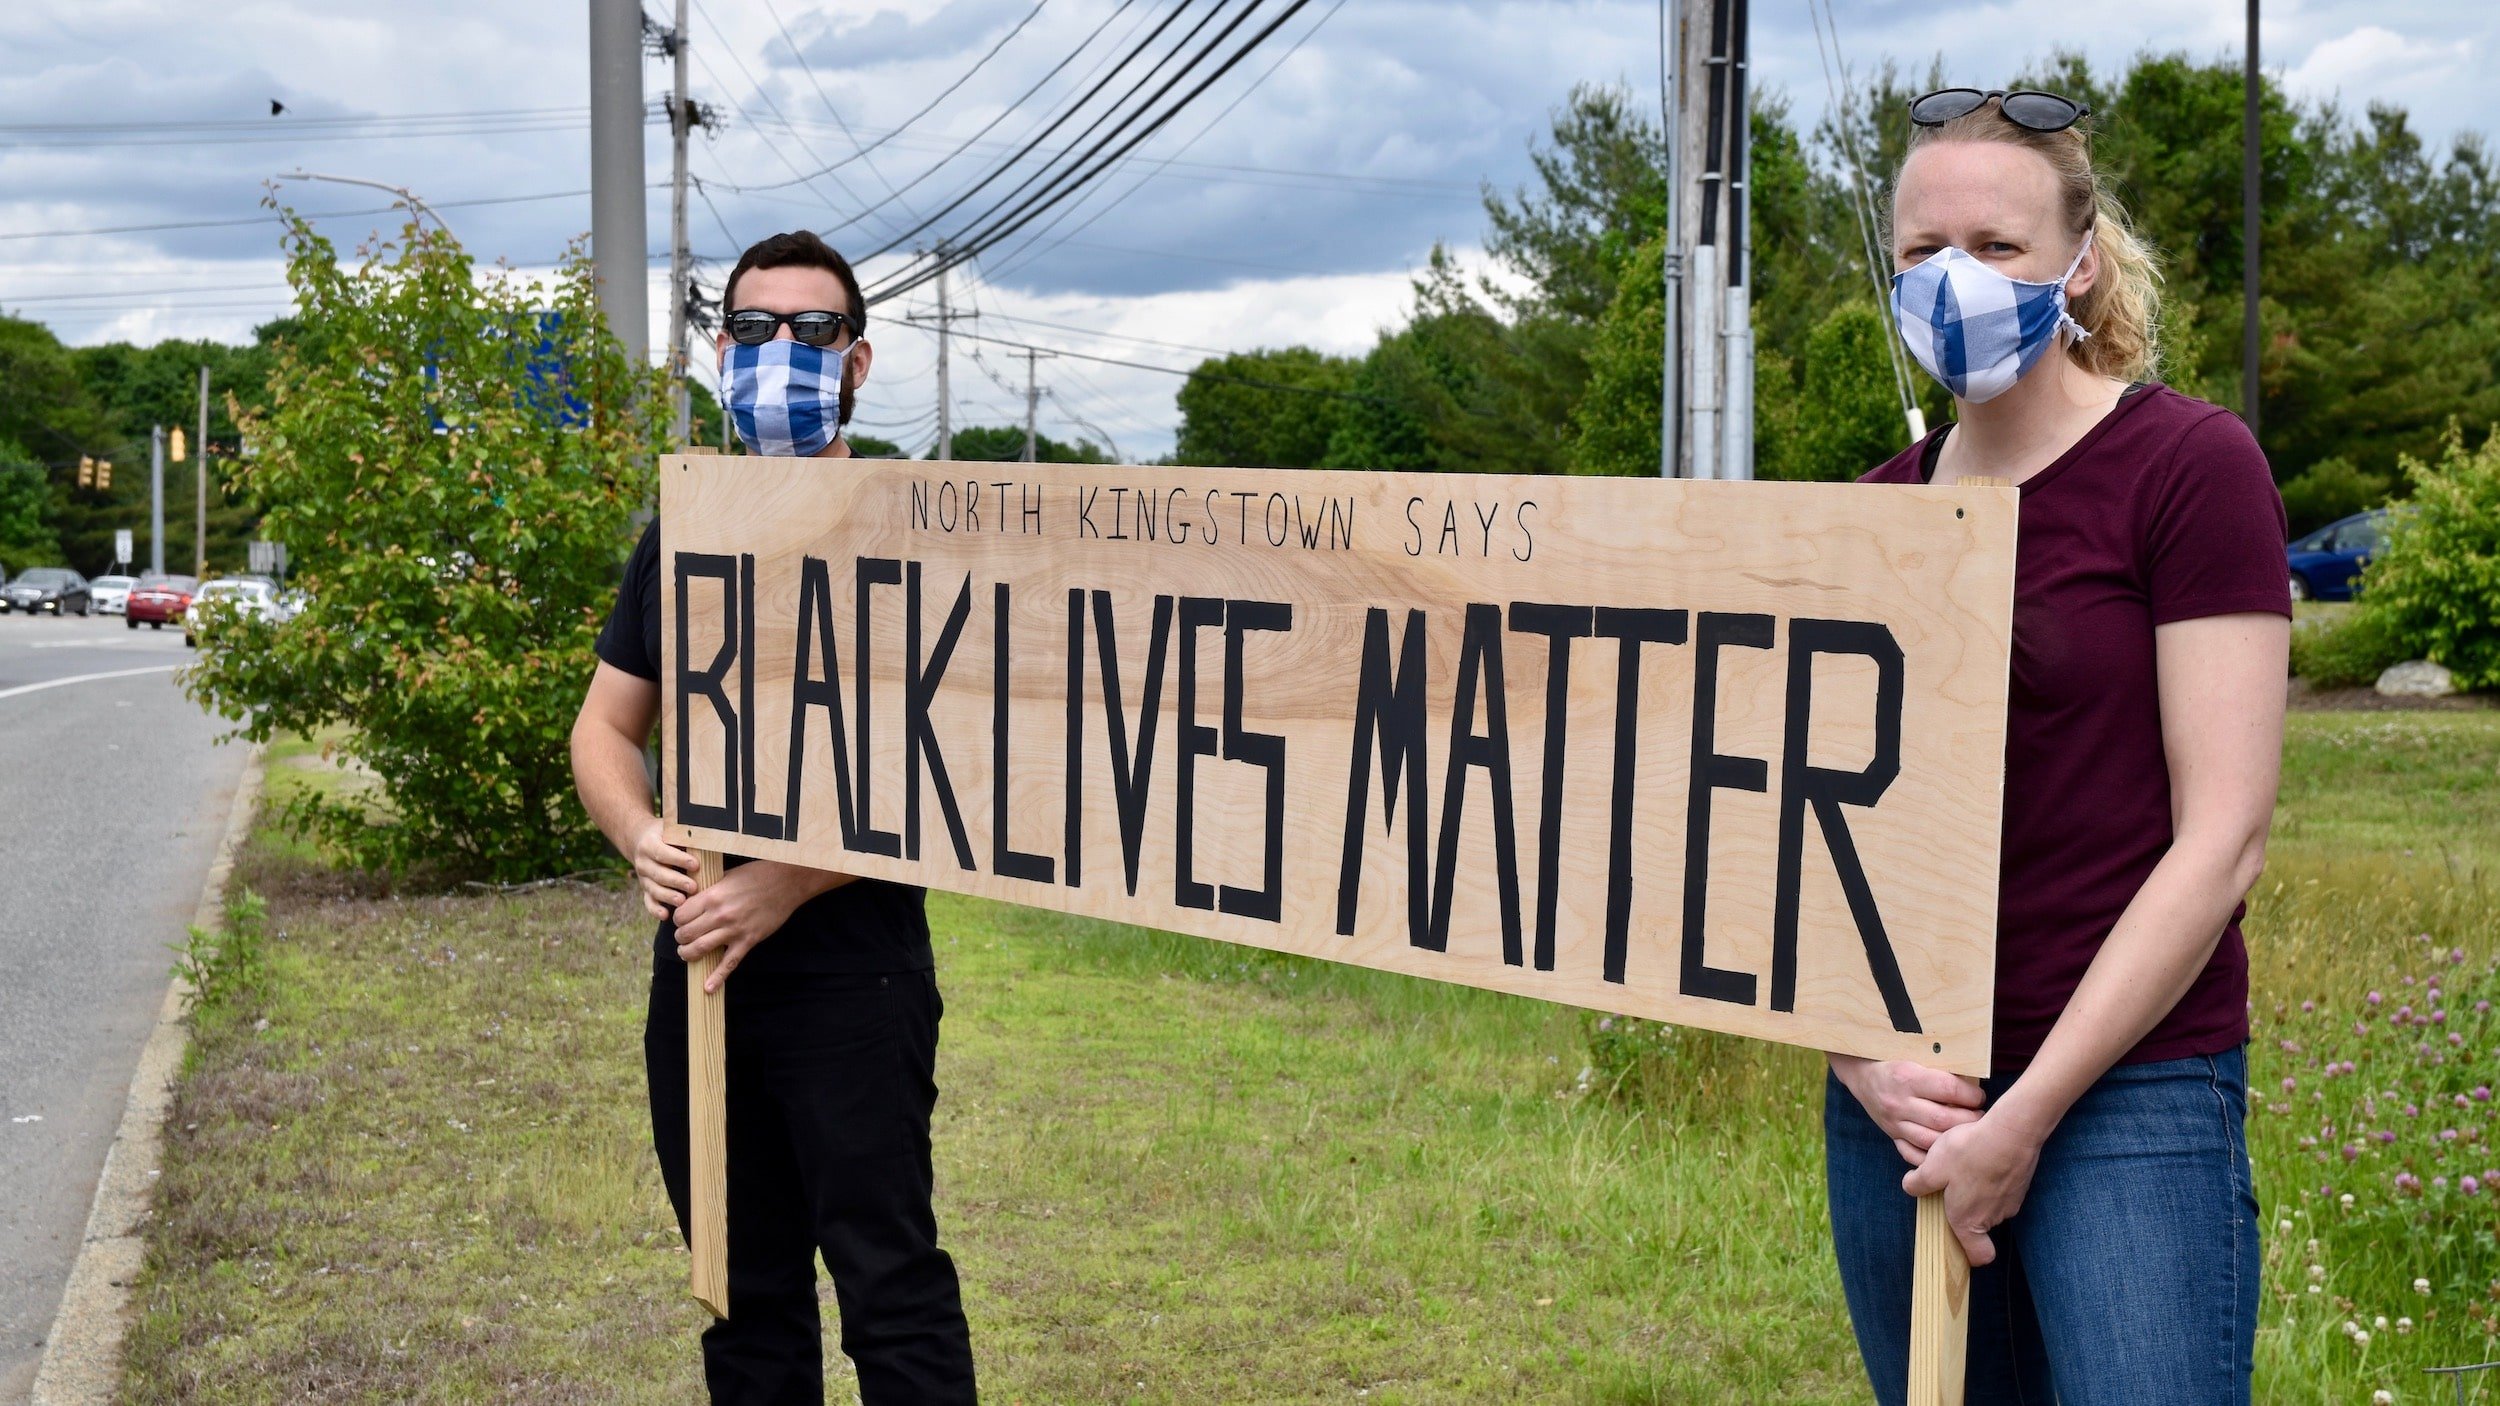 Rhode Island: North Kingstown residents proudly proclaim that Black Lives Matter